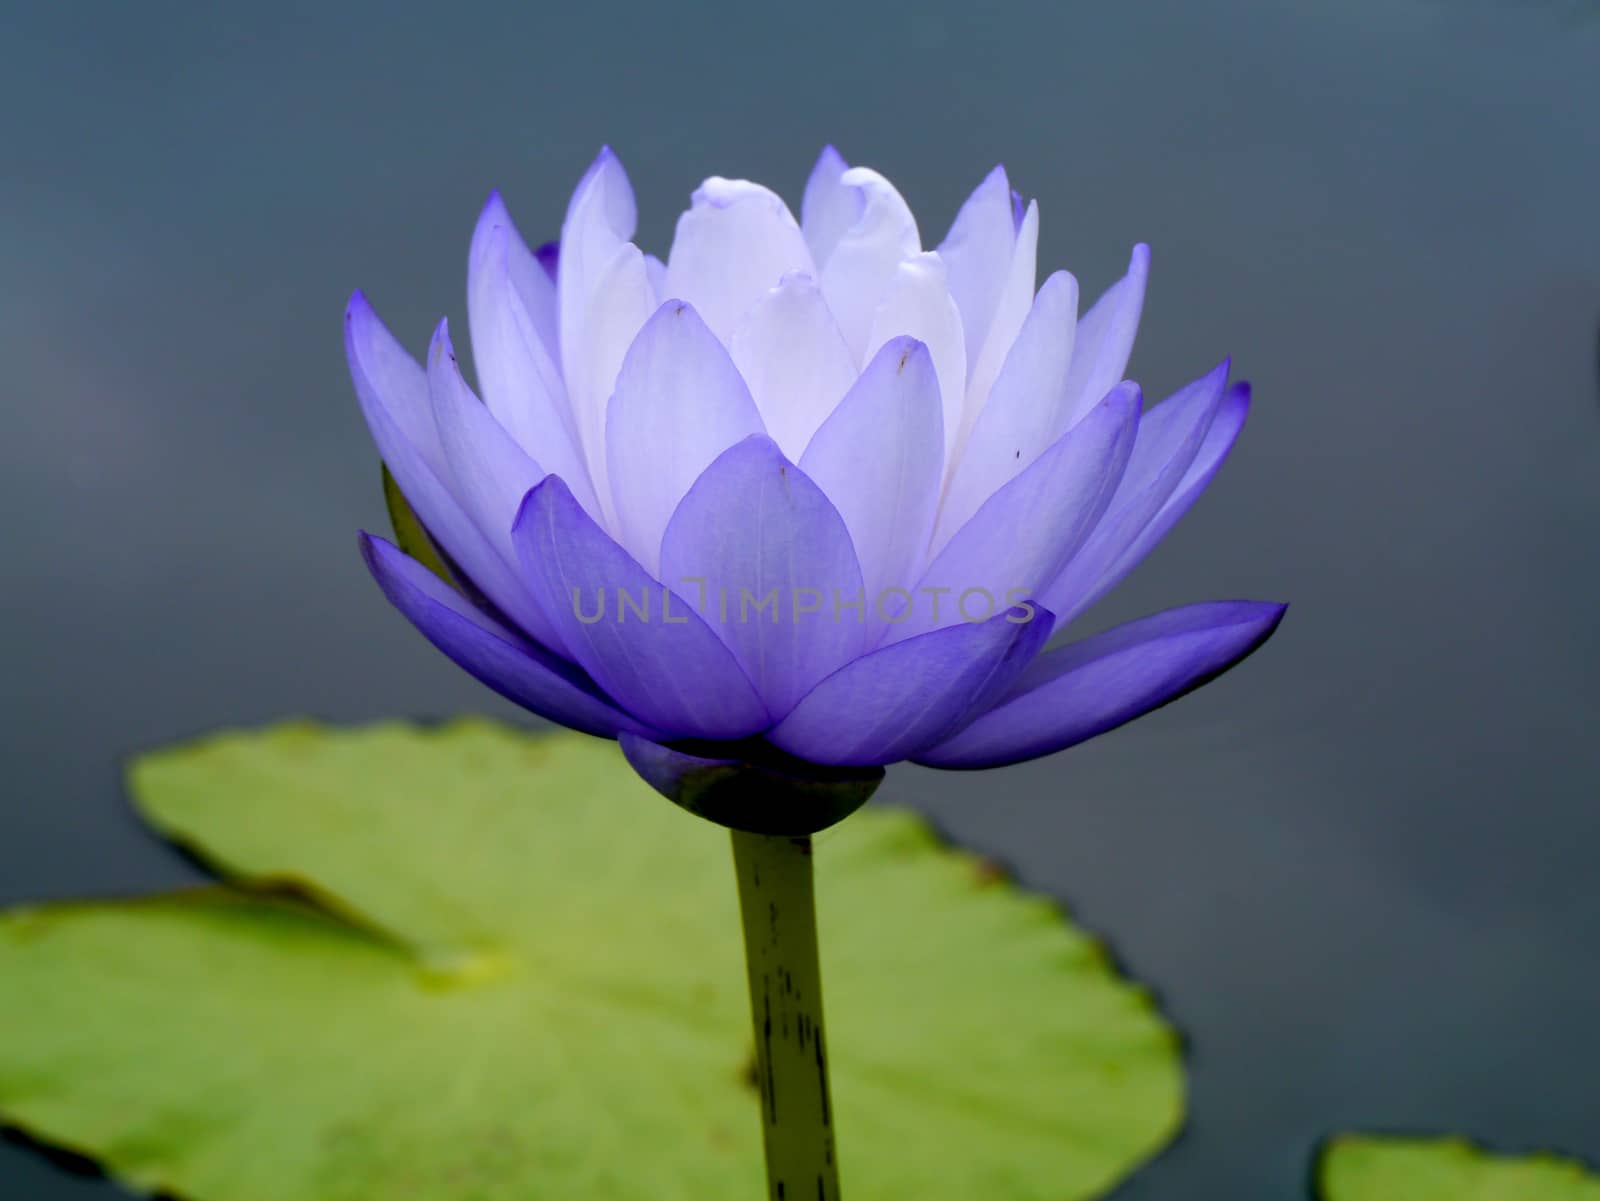 Blue water lily, lotus by Noppharat_th